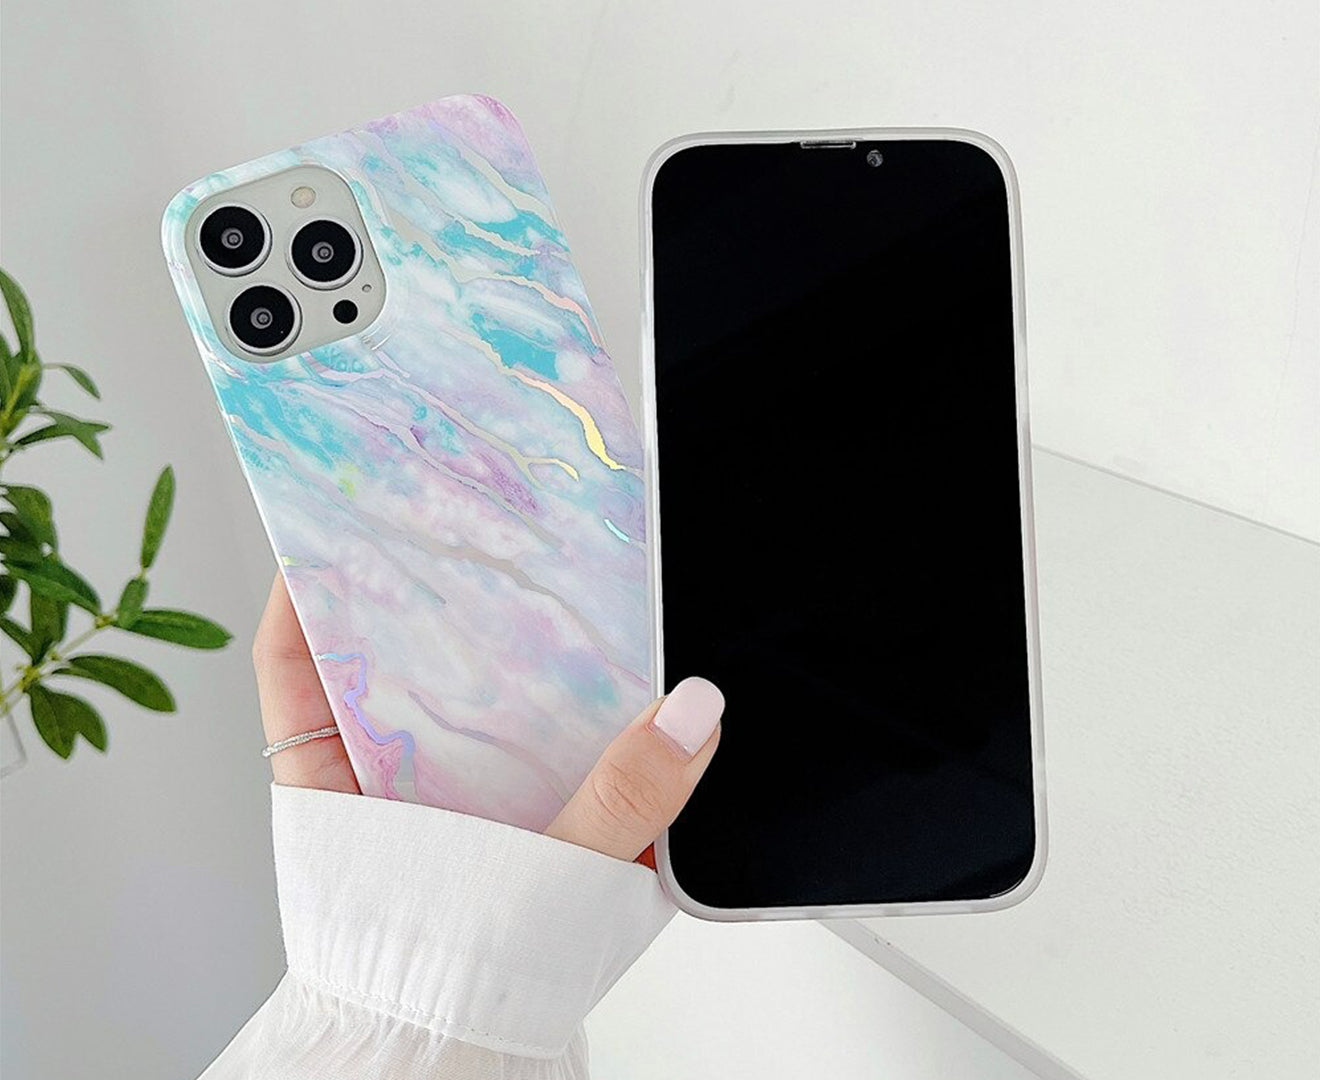 Anymob iPhone Case Pink Lavender Marble Pattern Soft Silicone Cover For iPhone 13 11 12 Pro Max X XR XS Max 7 8 Plus SE 2020-Mobile Phone Cases-PEROZ Accessories